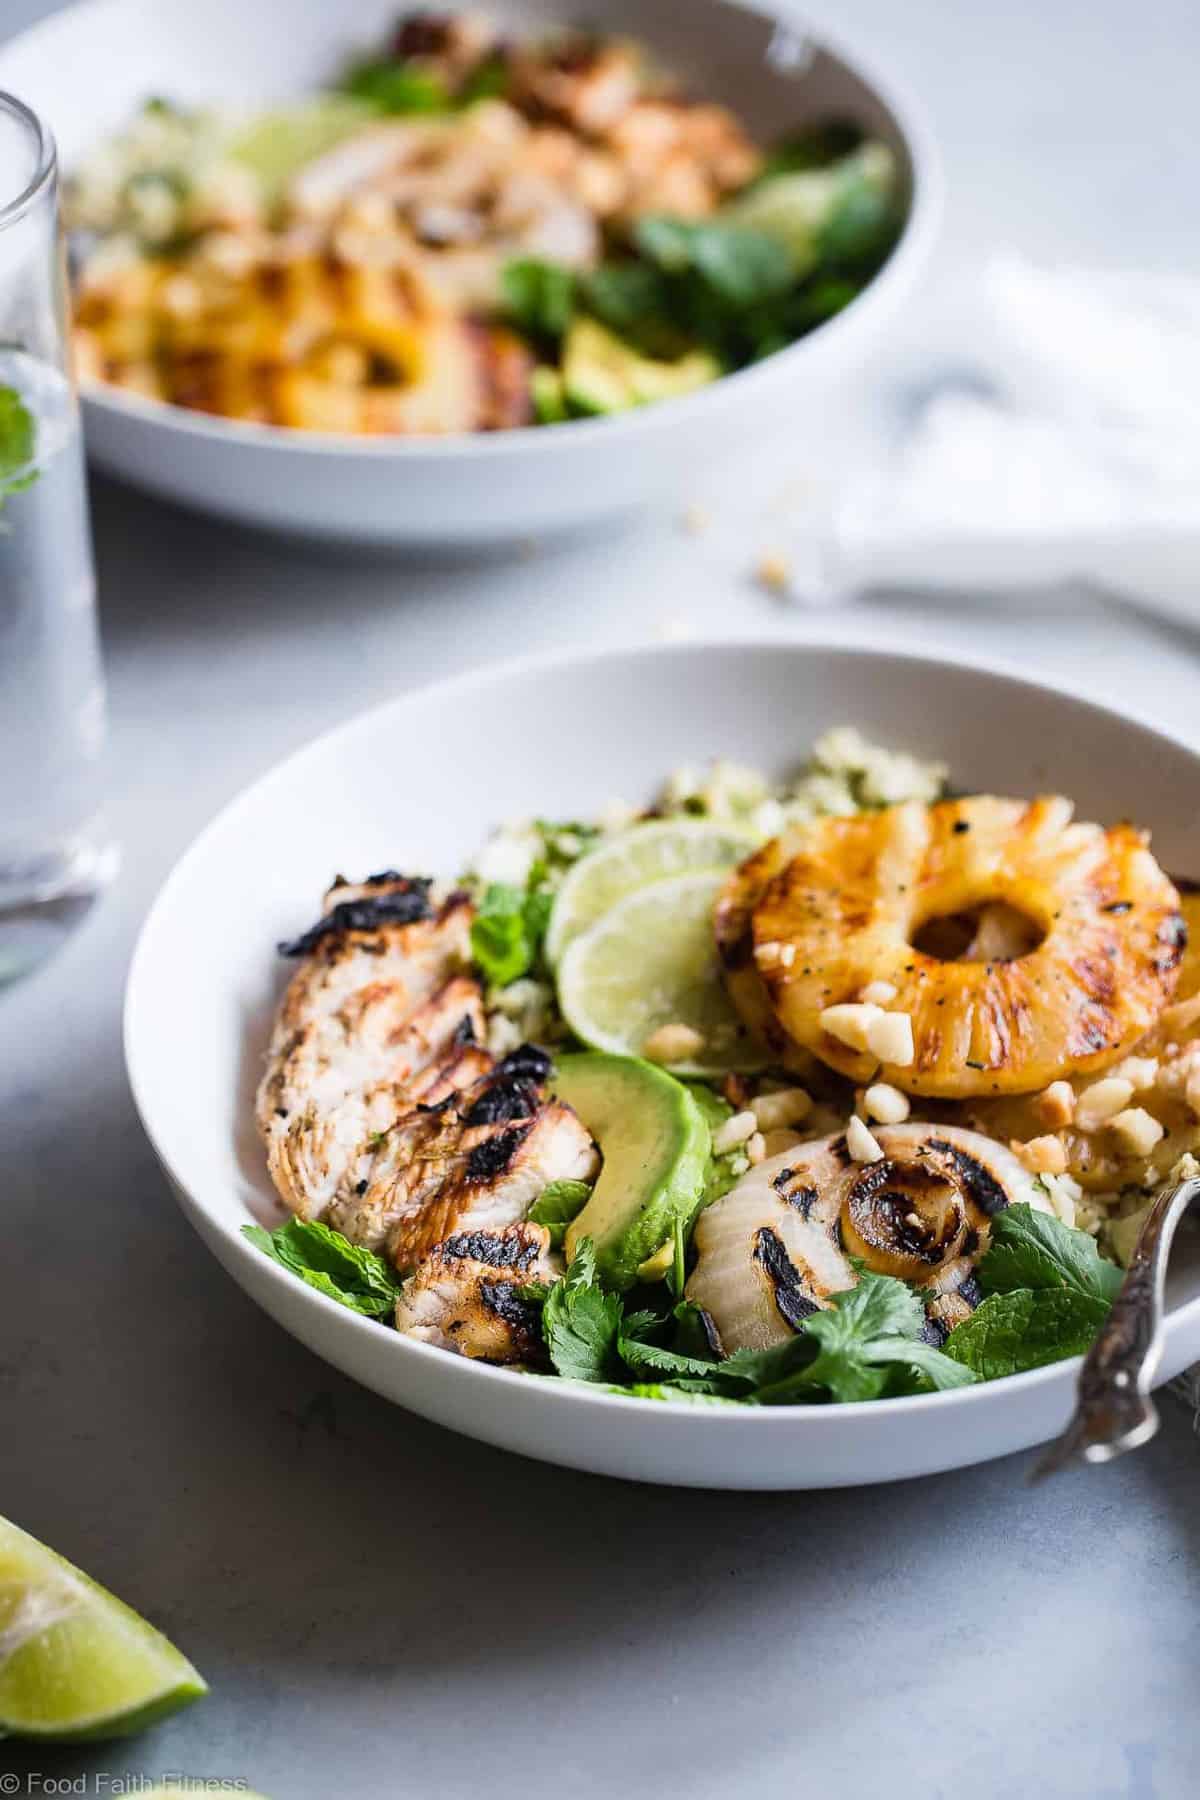  Grilled Tropical Chicken Bowls - These paleo and whole30 compliant Grilled Tropical Chicken bowls are an easy, healthy and gluten free weeknight dinner loaded with sweet and tangy island flavors! Sure to be a crowd pleaser! | #Foodfaithfitness | #Paleo #Whole30 #Glutenfree #Healthy #Chickendinner